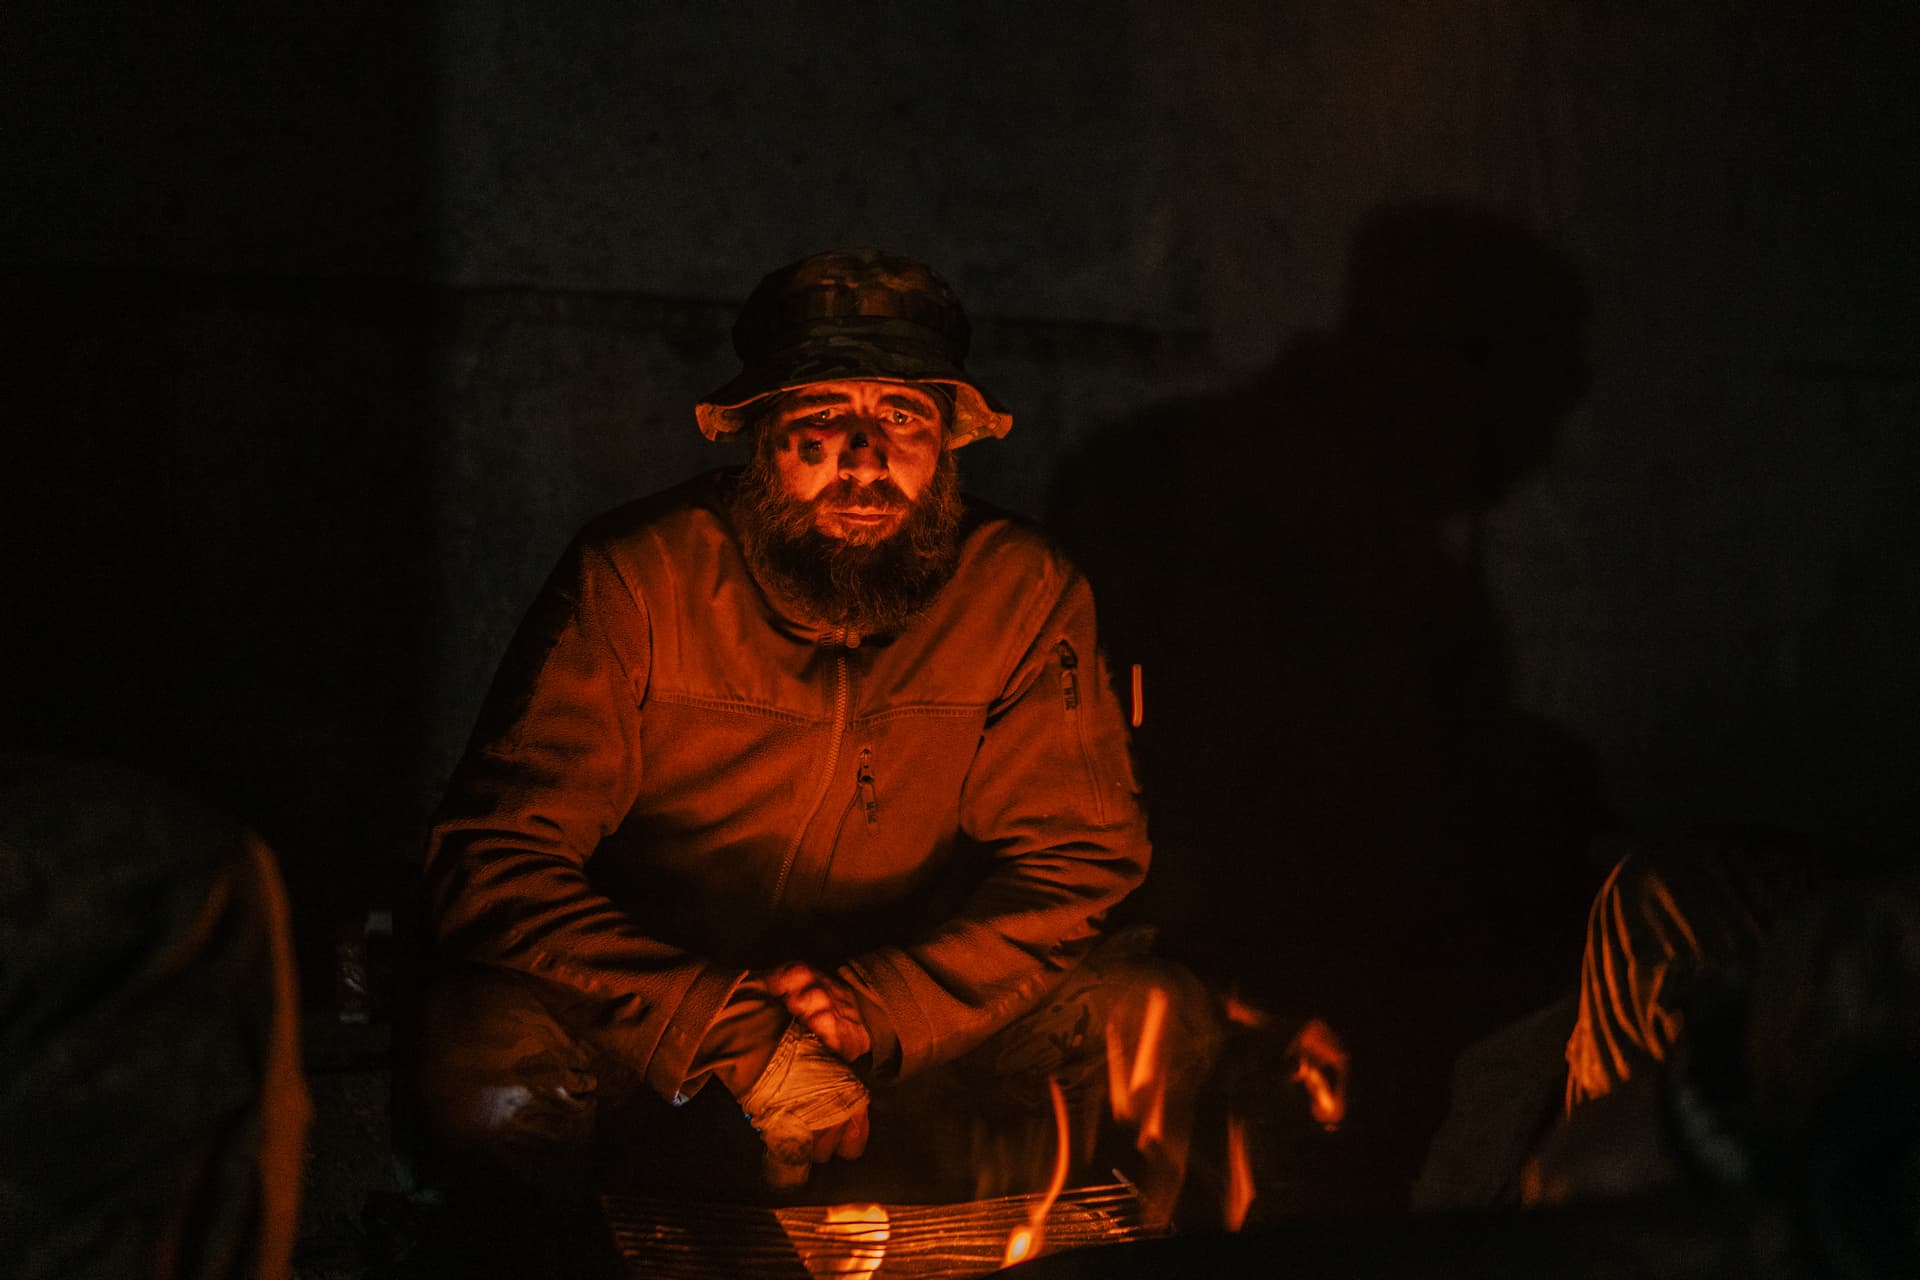 A Ukrainian soldier inside the ruined Azovstal steel plant takes a rest in his shelter in Mariupol